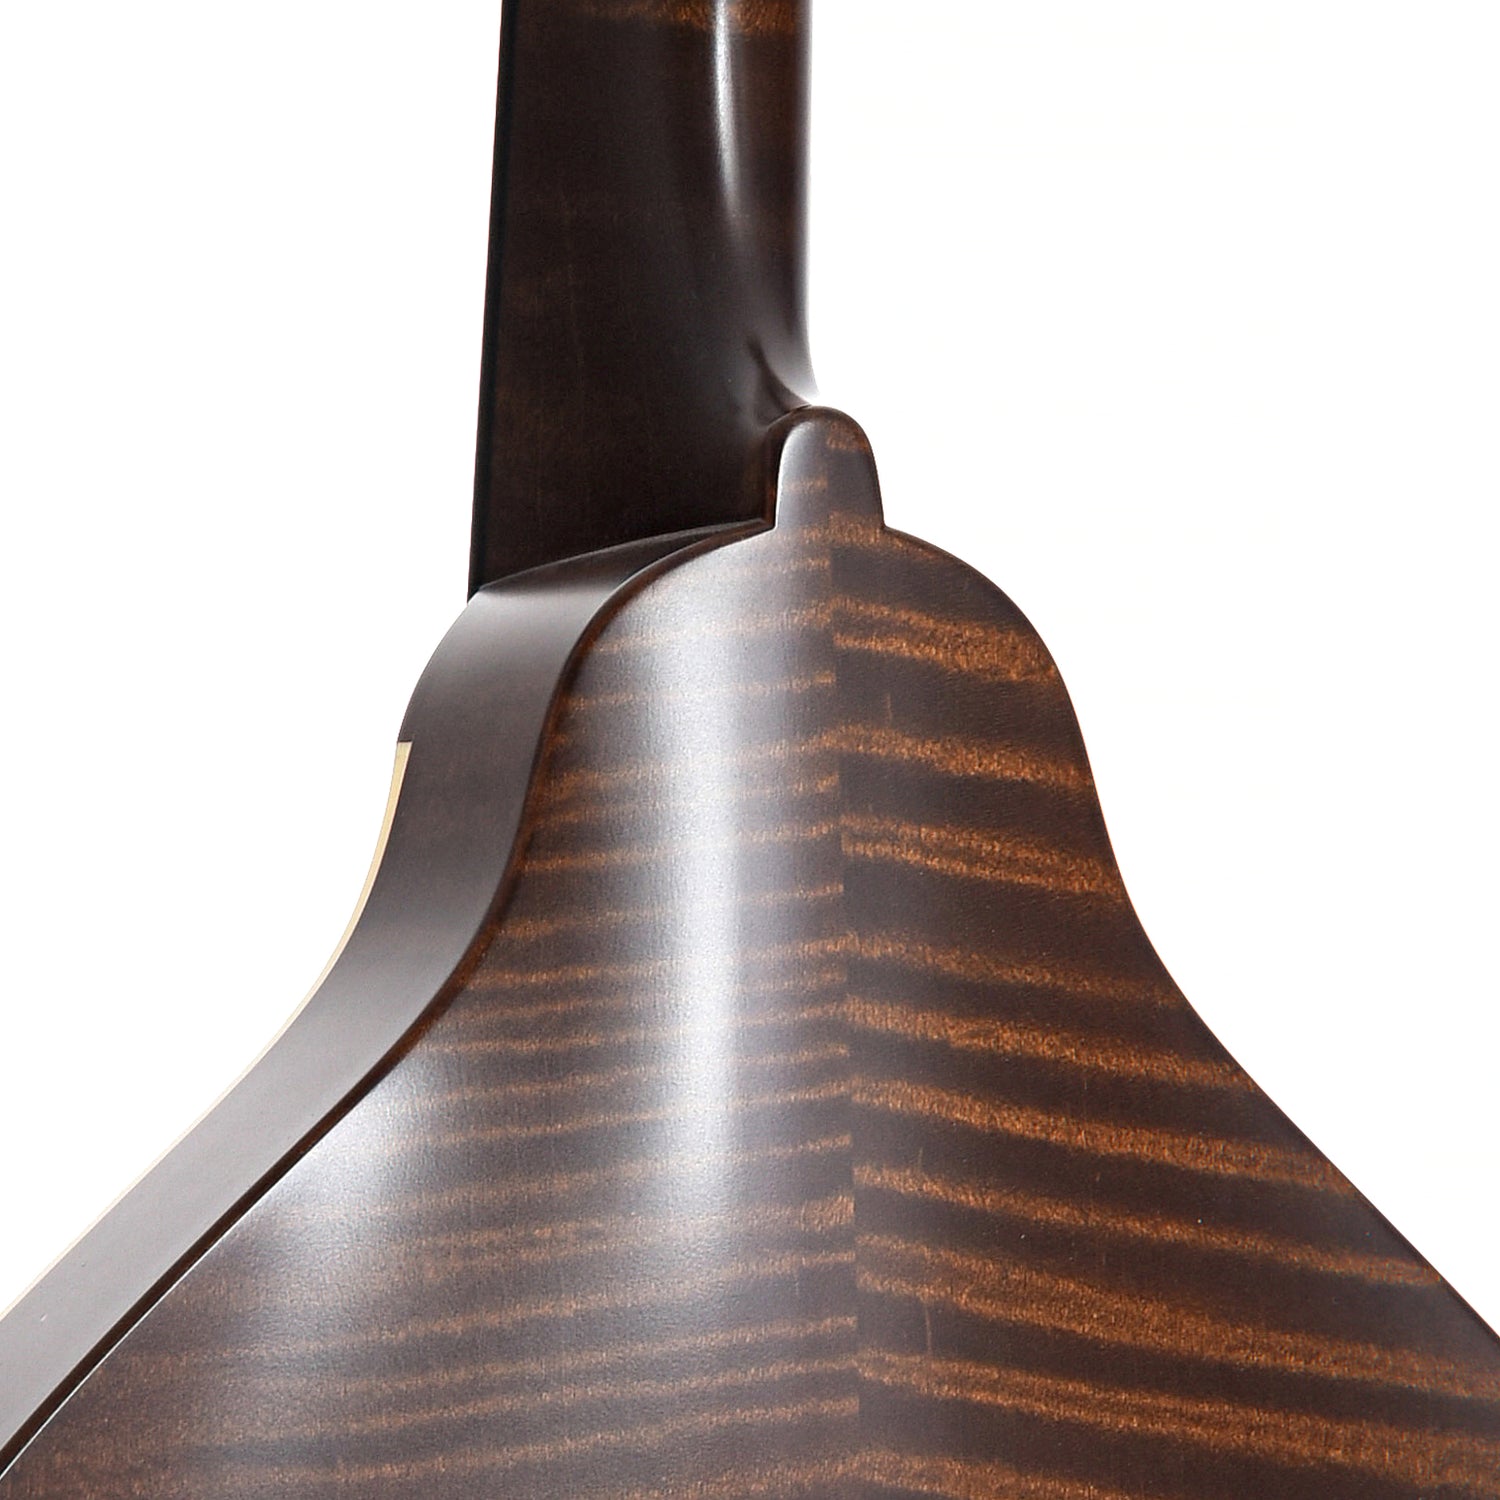 Neck Joint of Pava A5 Satin Model Mandolin, Brown